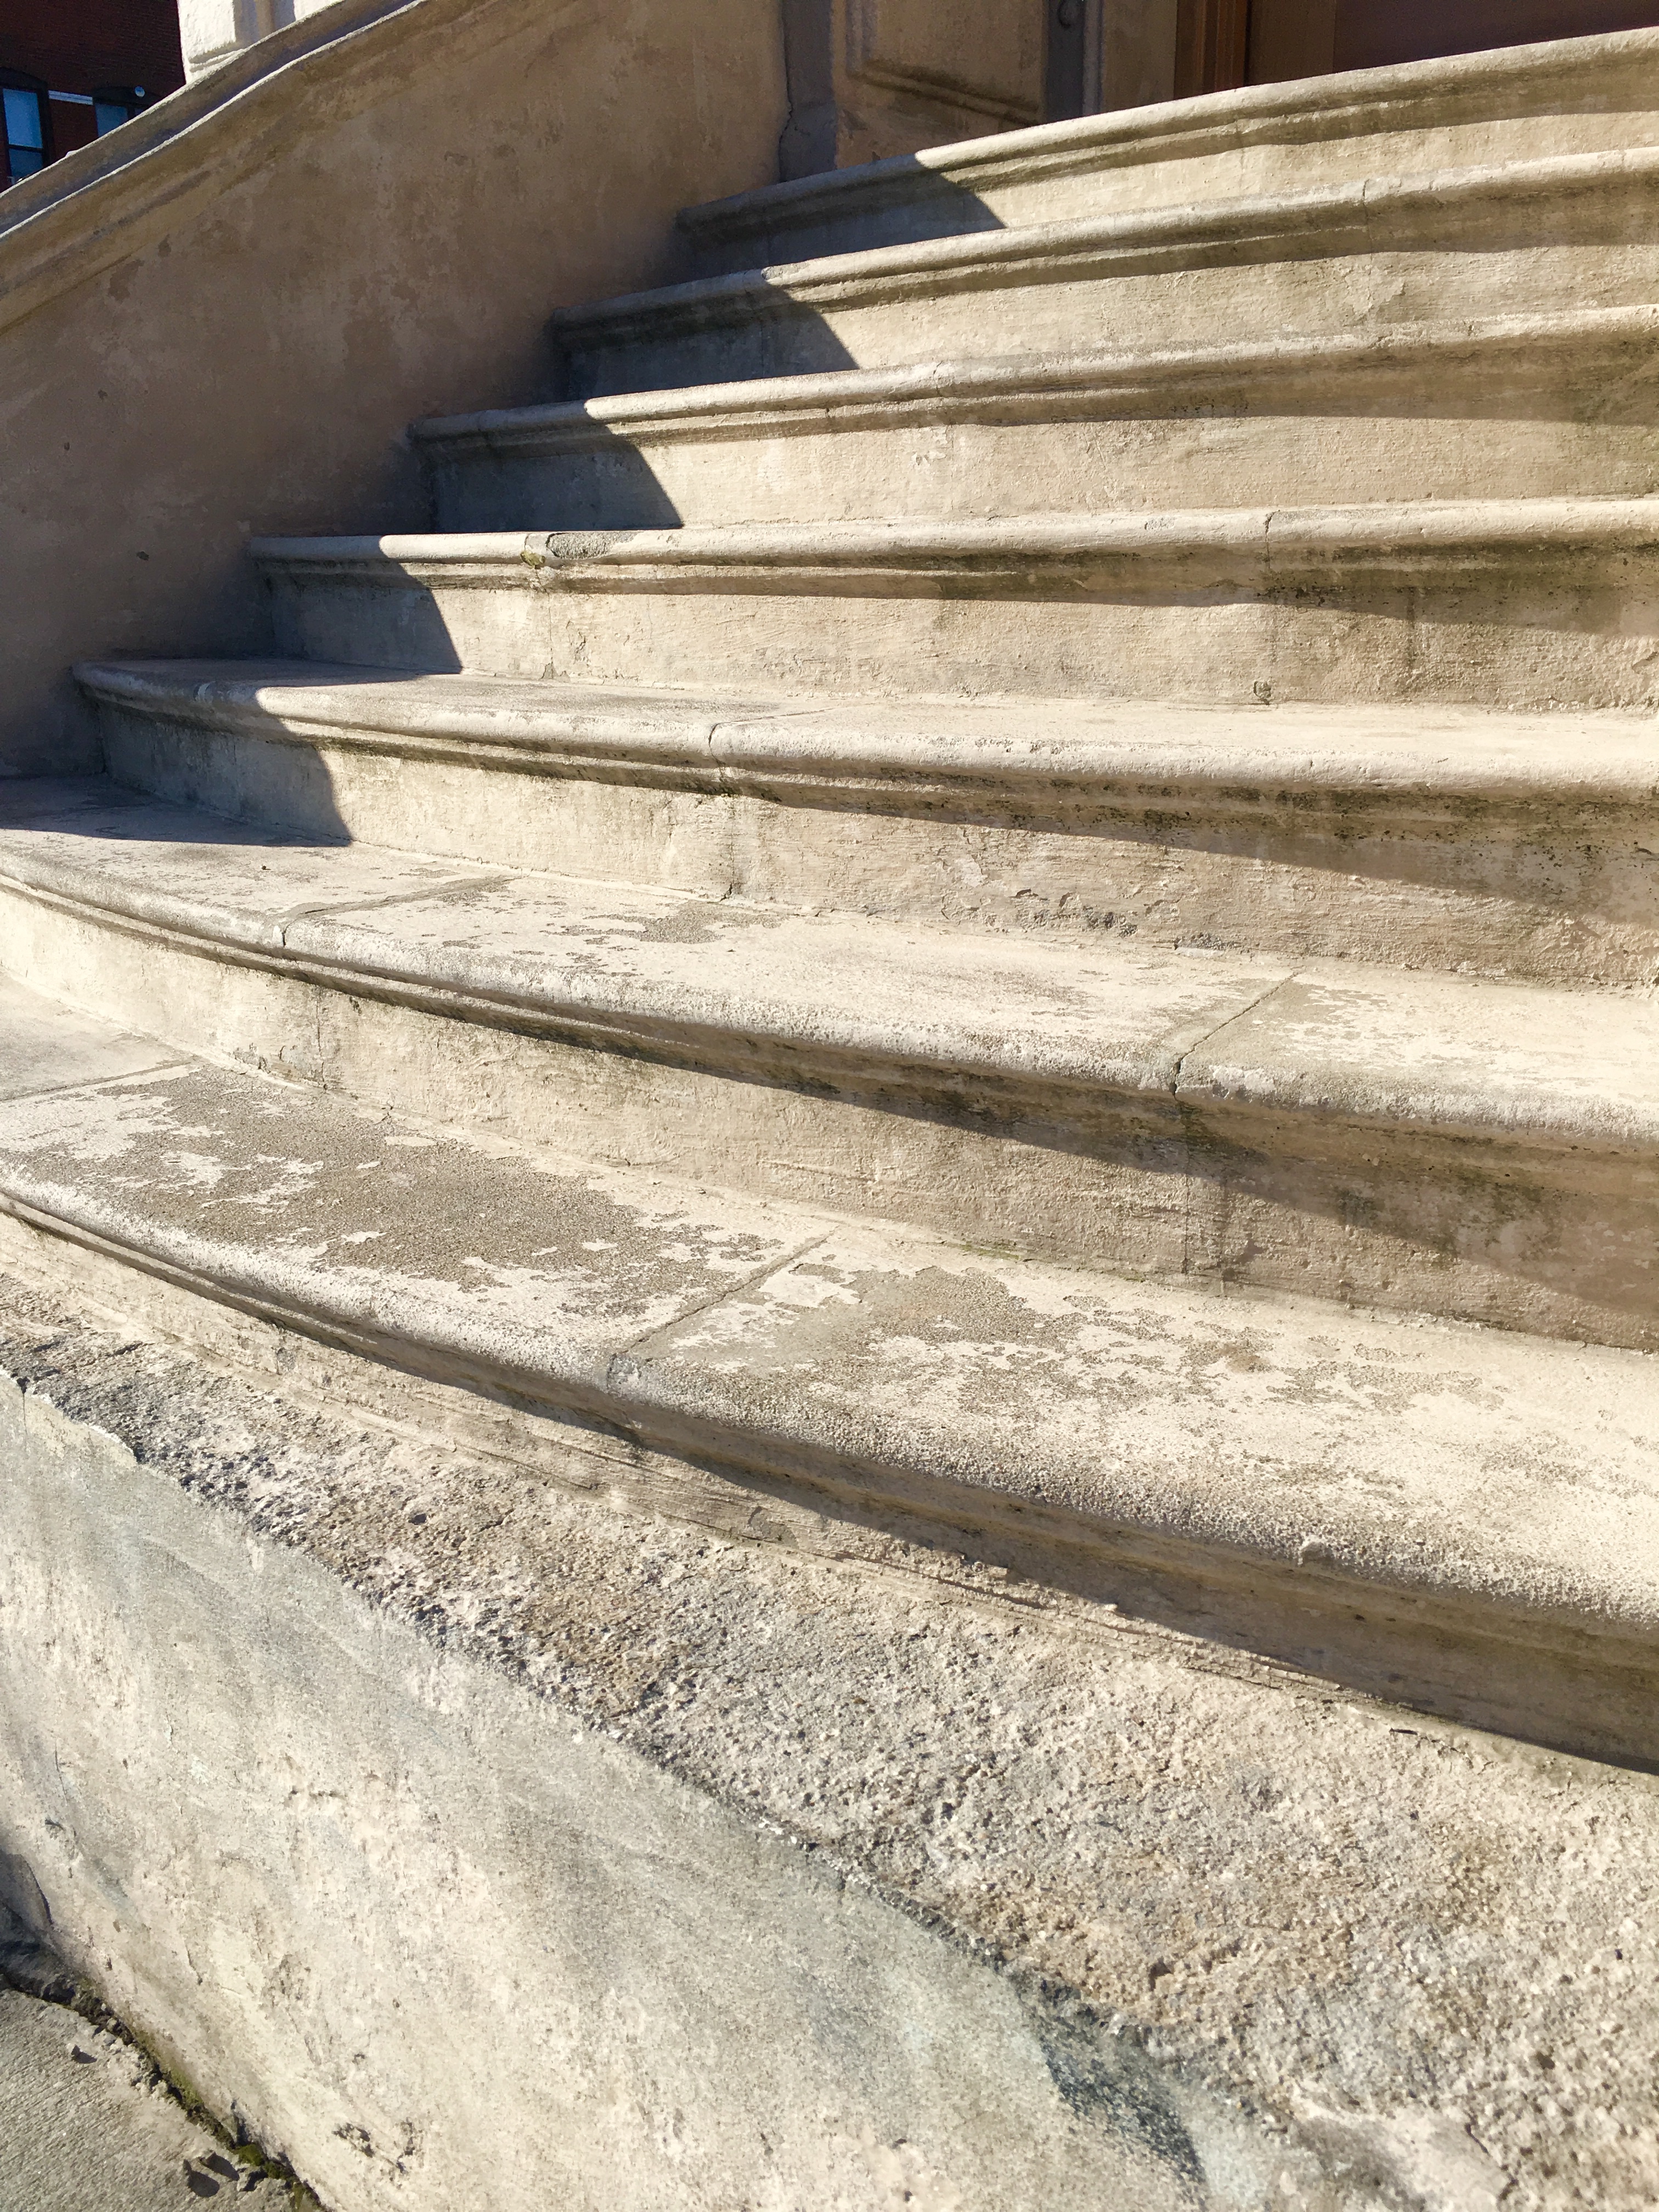 This Aug. 29 photo shows where the finish has worn off a set of entrance stairs at the Coignet Building. Eagle photo by Lore Croghan